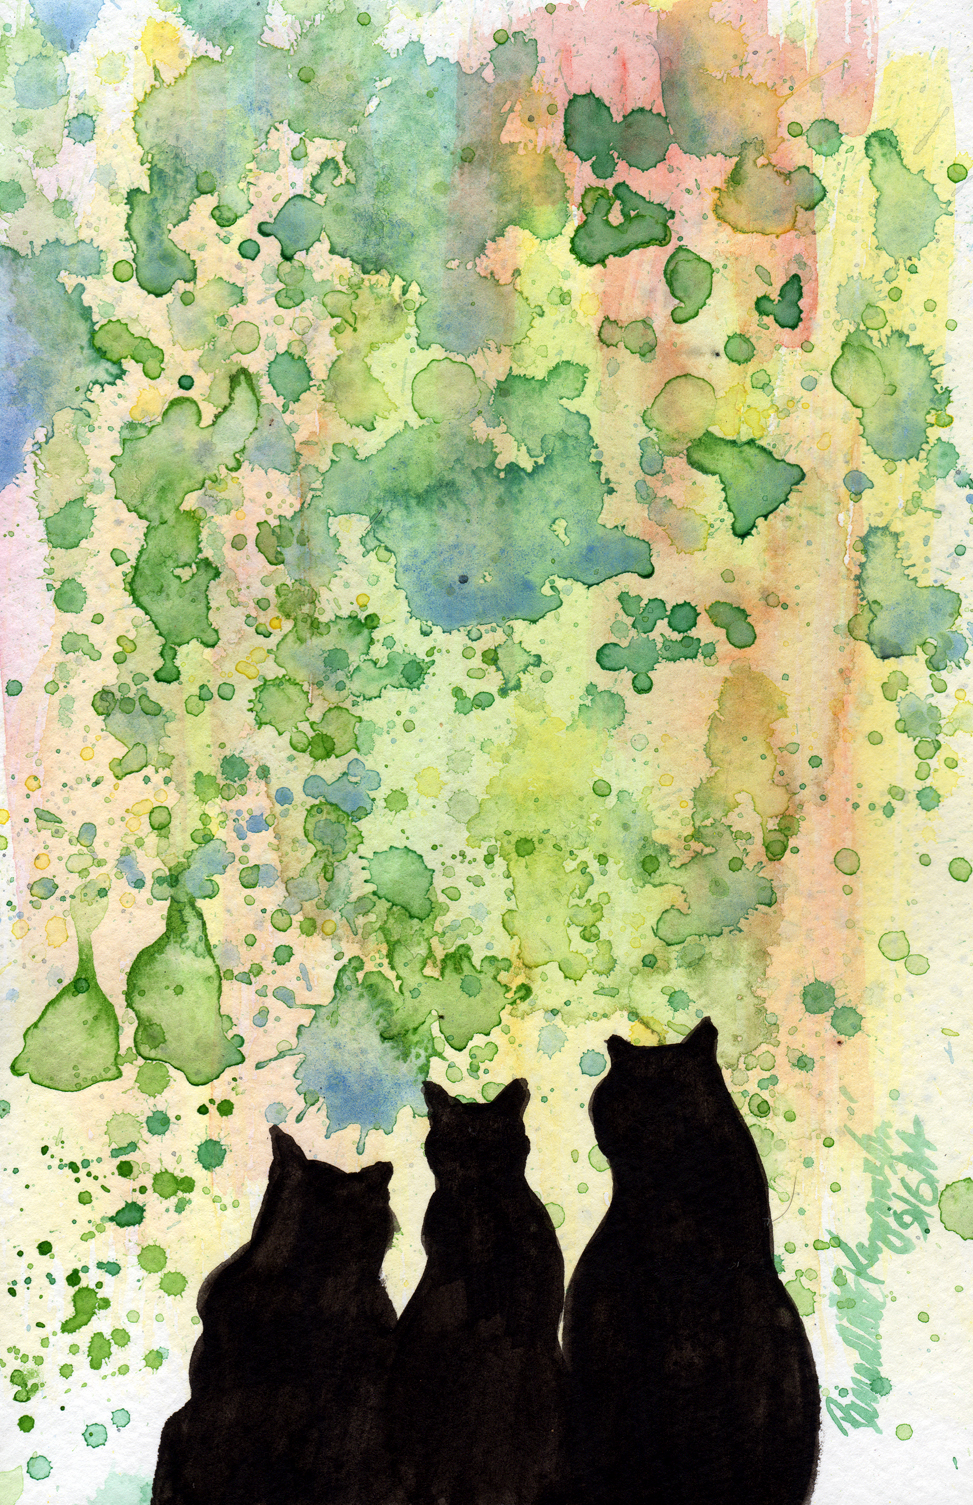 watercolor of three black cats with spattered background